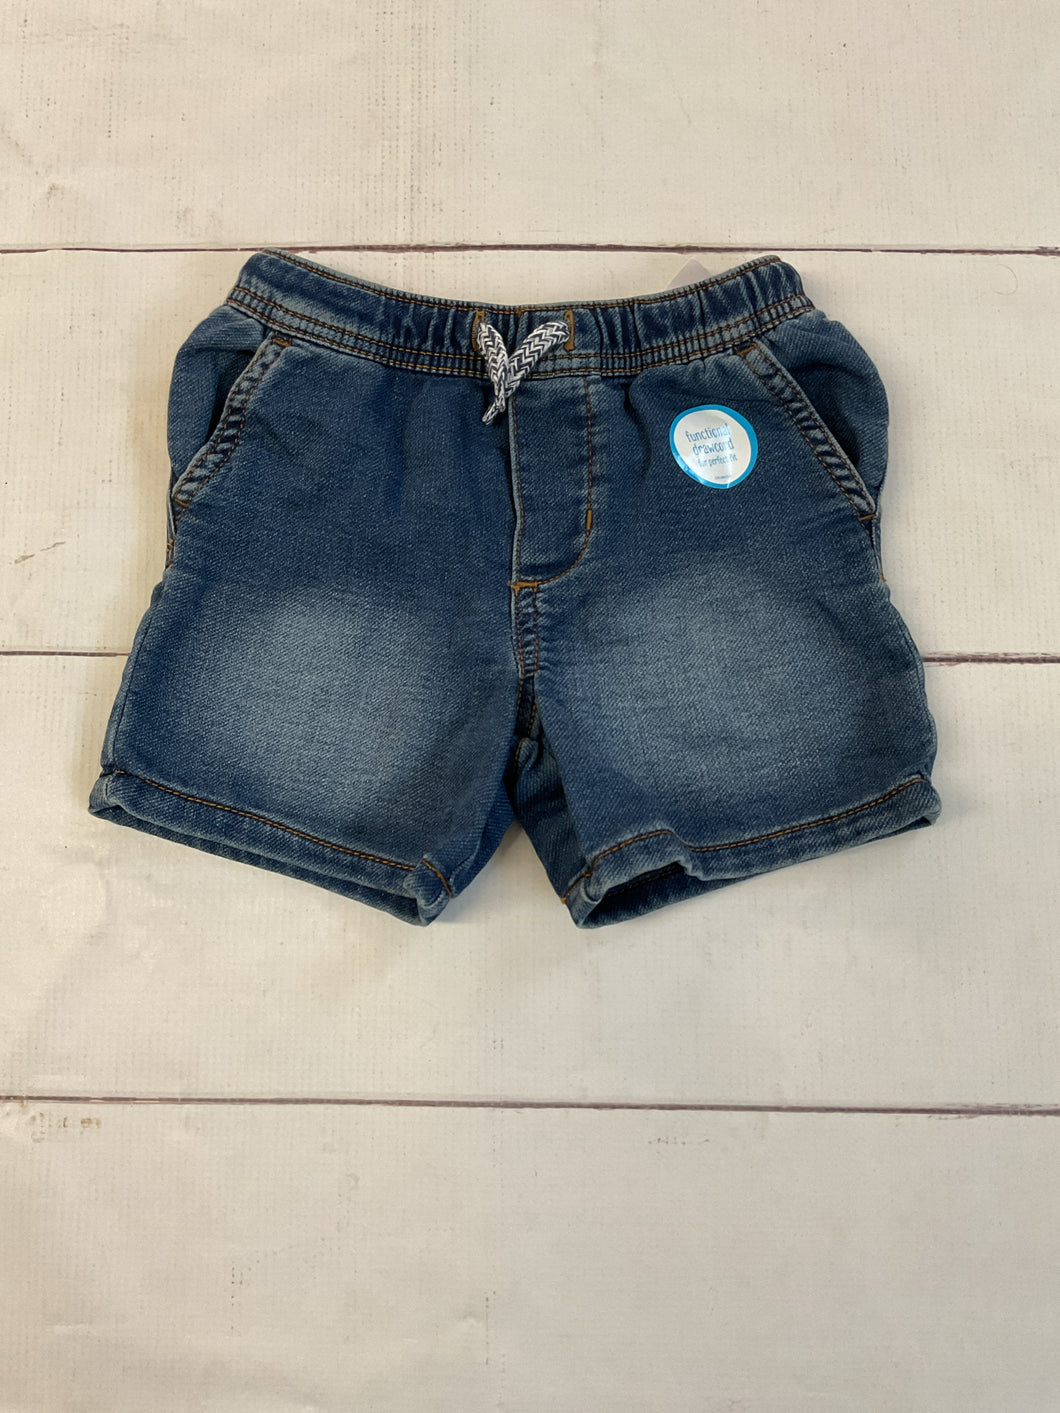 Carter's Size 18M Shorts